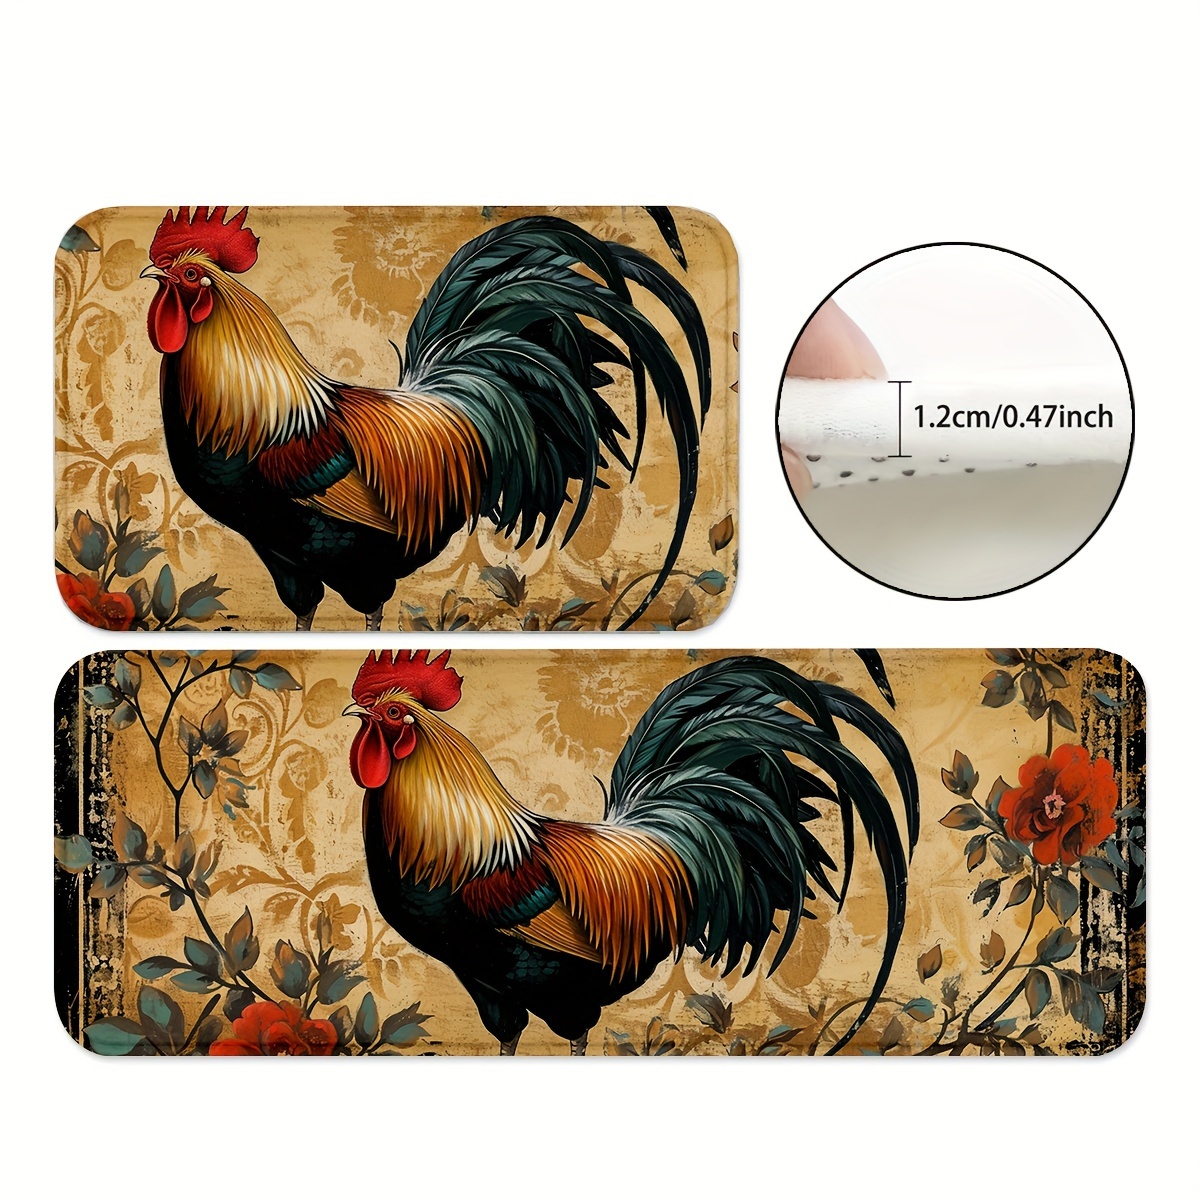 

1/2pcs, Area Rug, Rooster Cock Kitchen Mats, Non-slip And Durable Bathroom Pads, Comfortable Standing Runner Rugs, Carpets For Kitchen, Home, Office, Sink, Laundry Room, Bathroom, Spring Decor